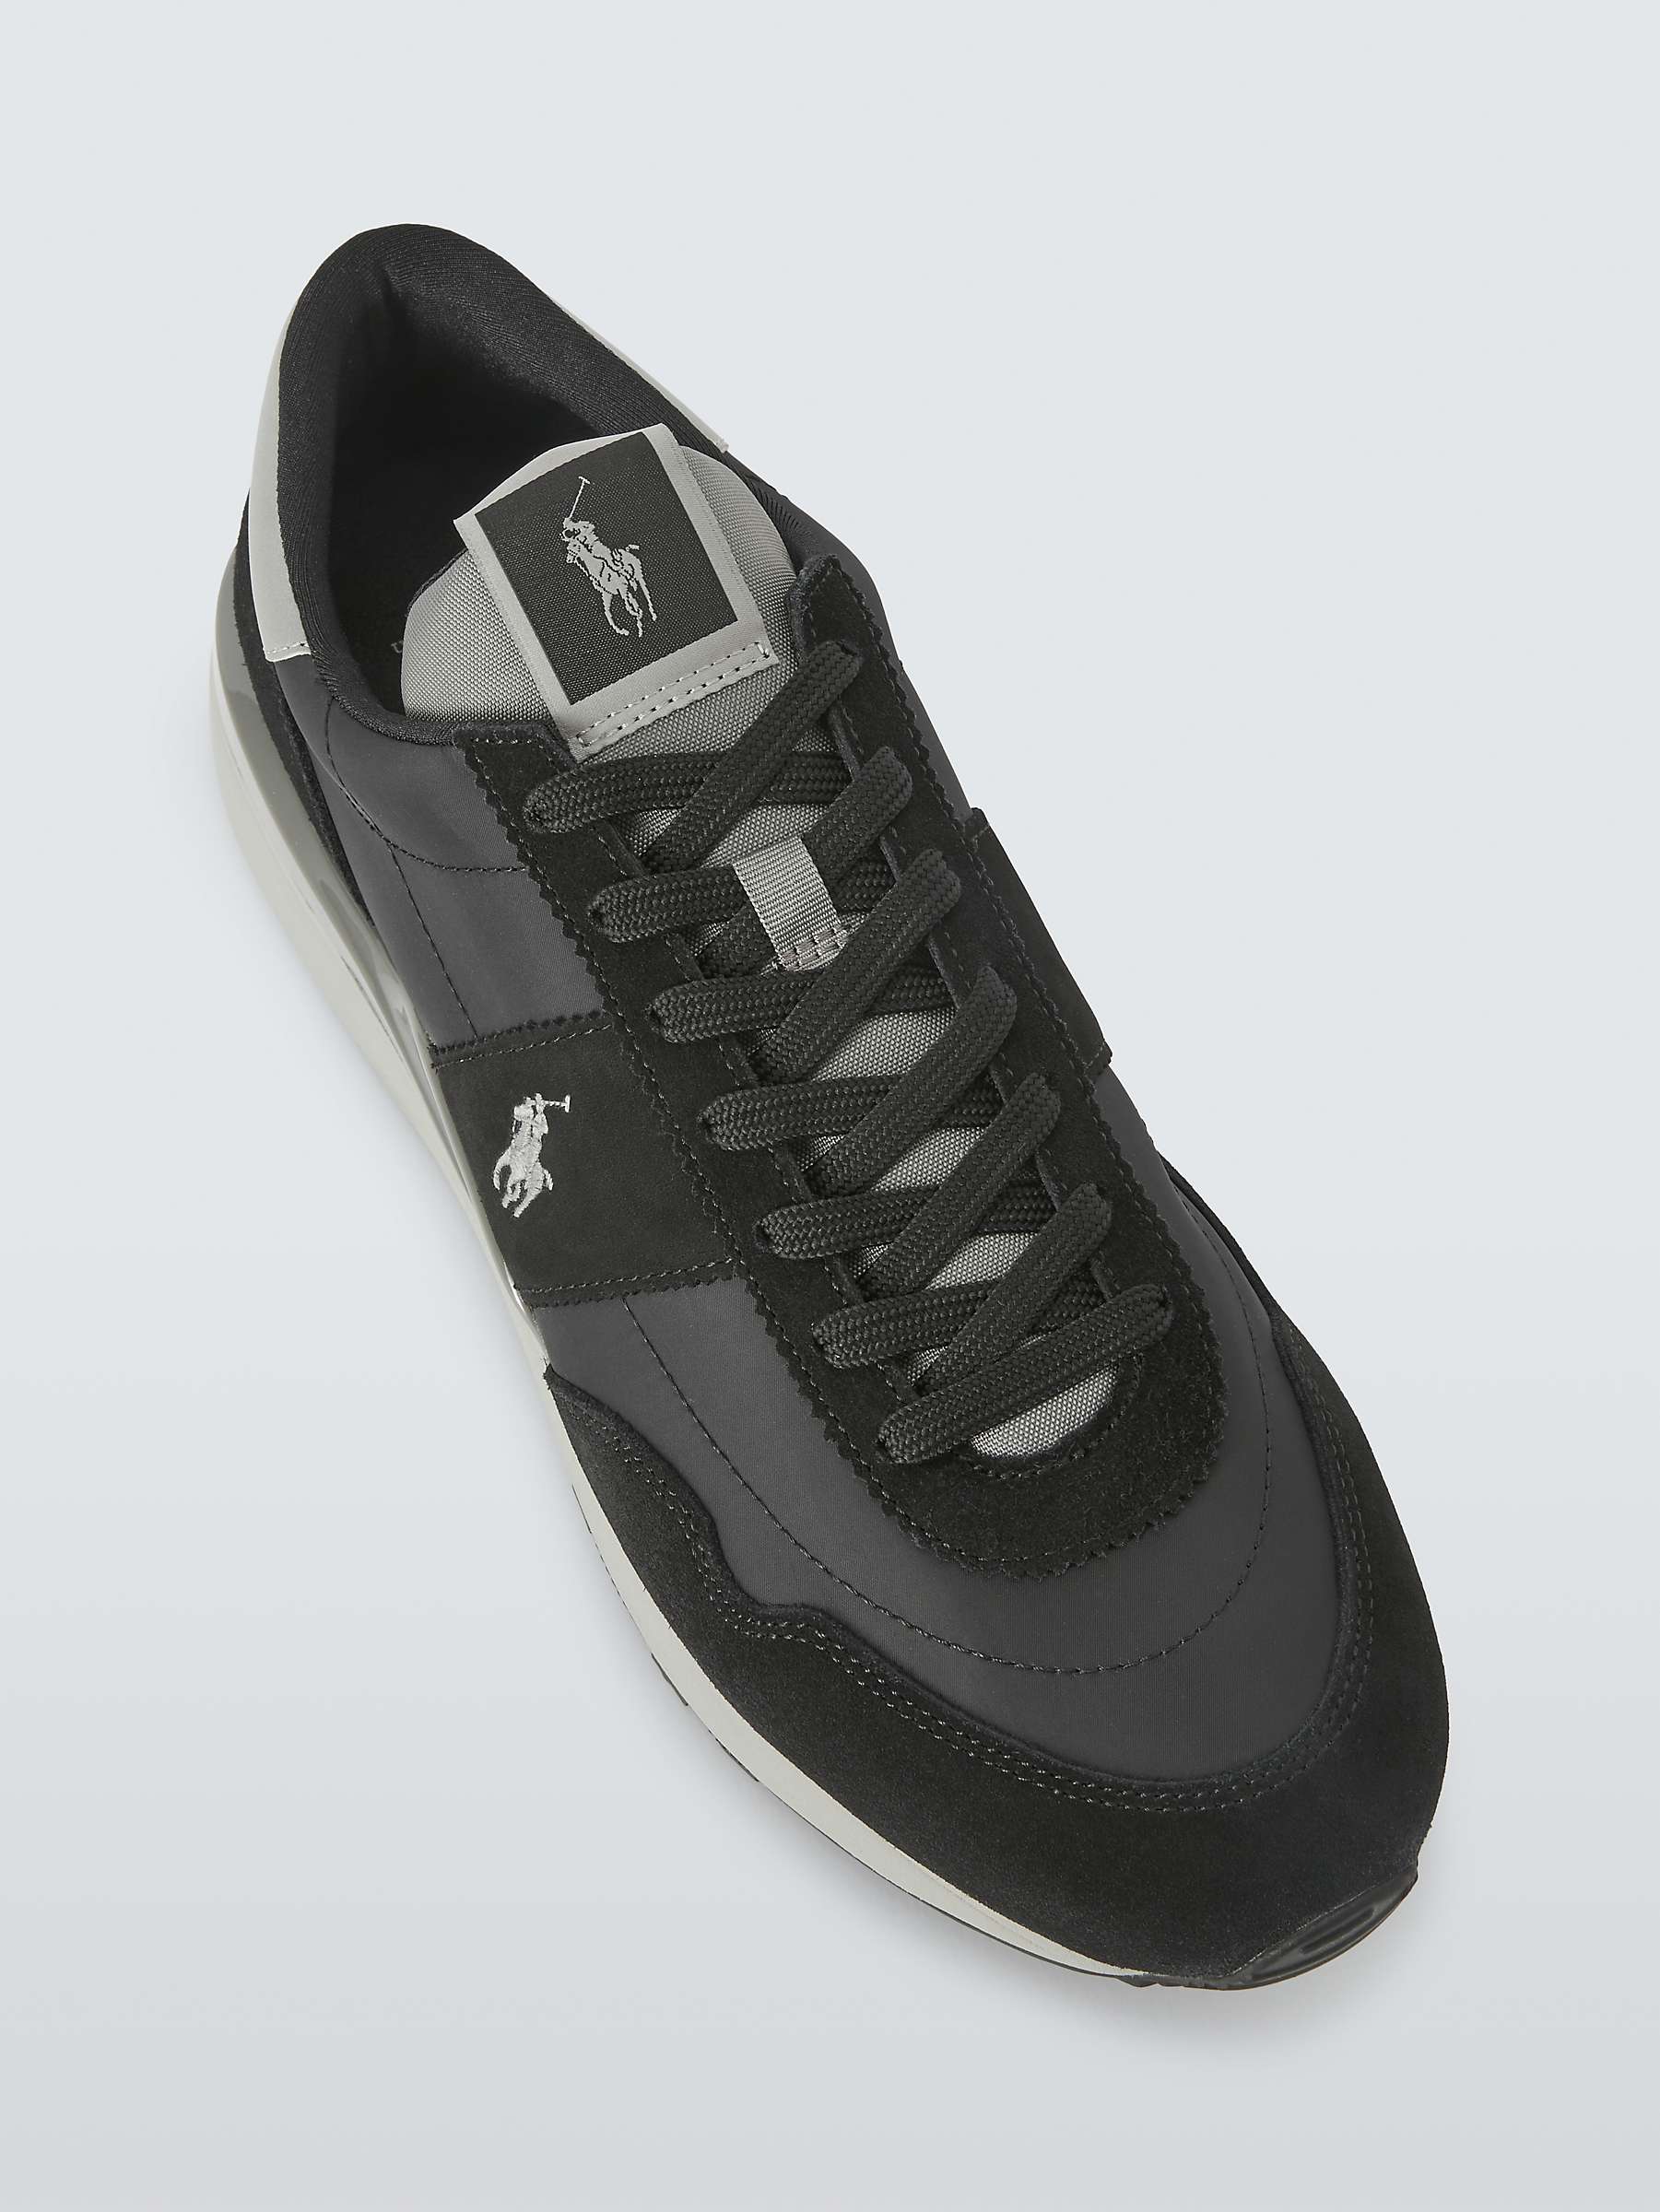 Buy Polo Ralph Lauren Train 89 Suede Trainers Online at johnlewis.com